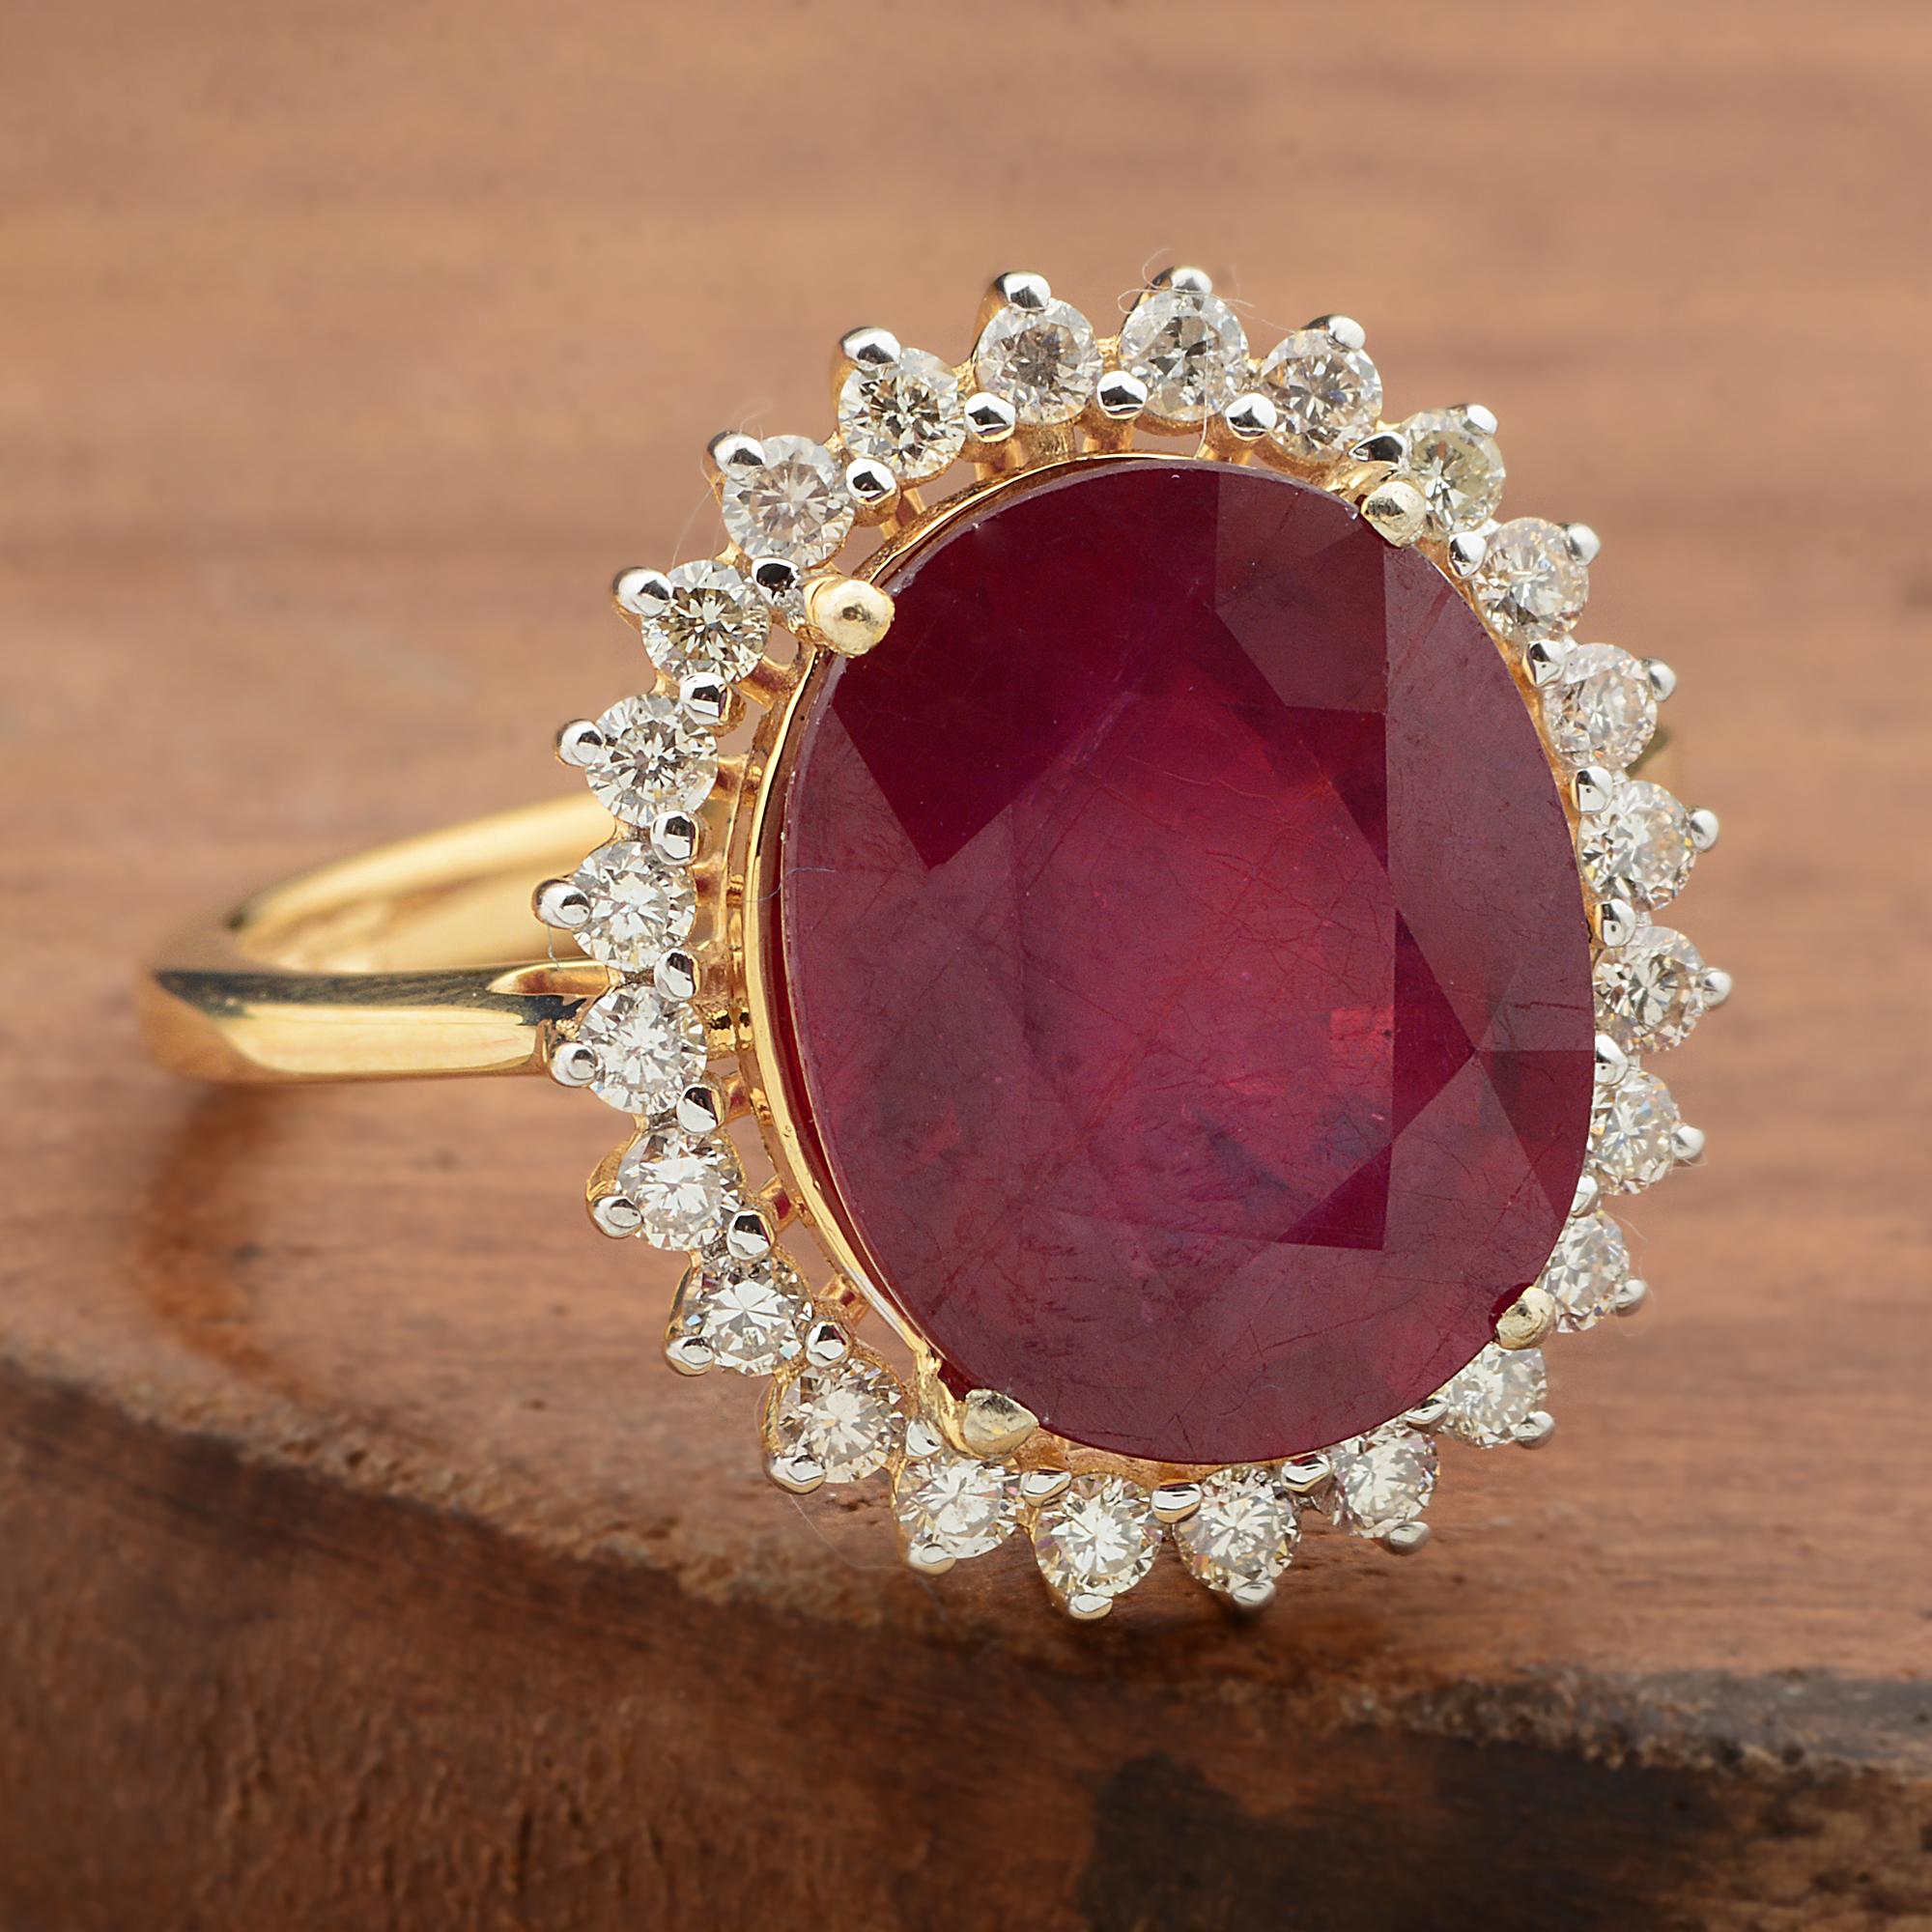 For Sale:  Oval Red Processed Gemstone Ring Diamond Solid 10K Yellow Gold Diamond Jewelry 4